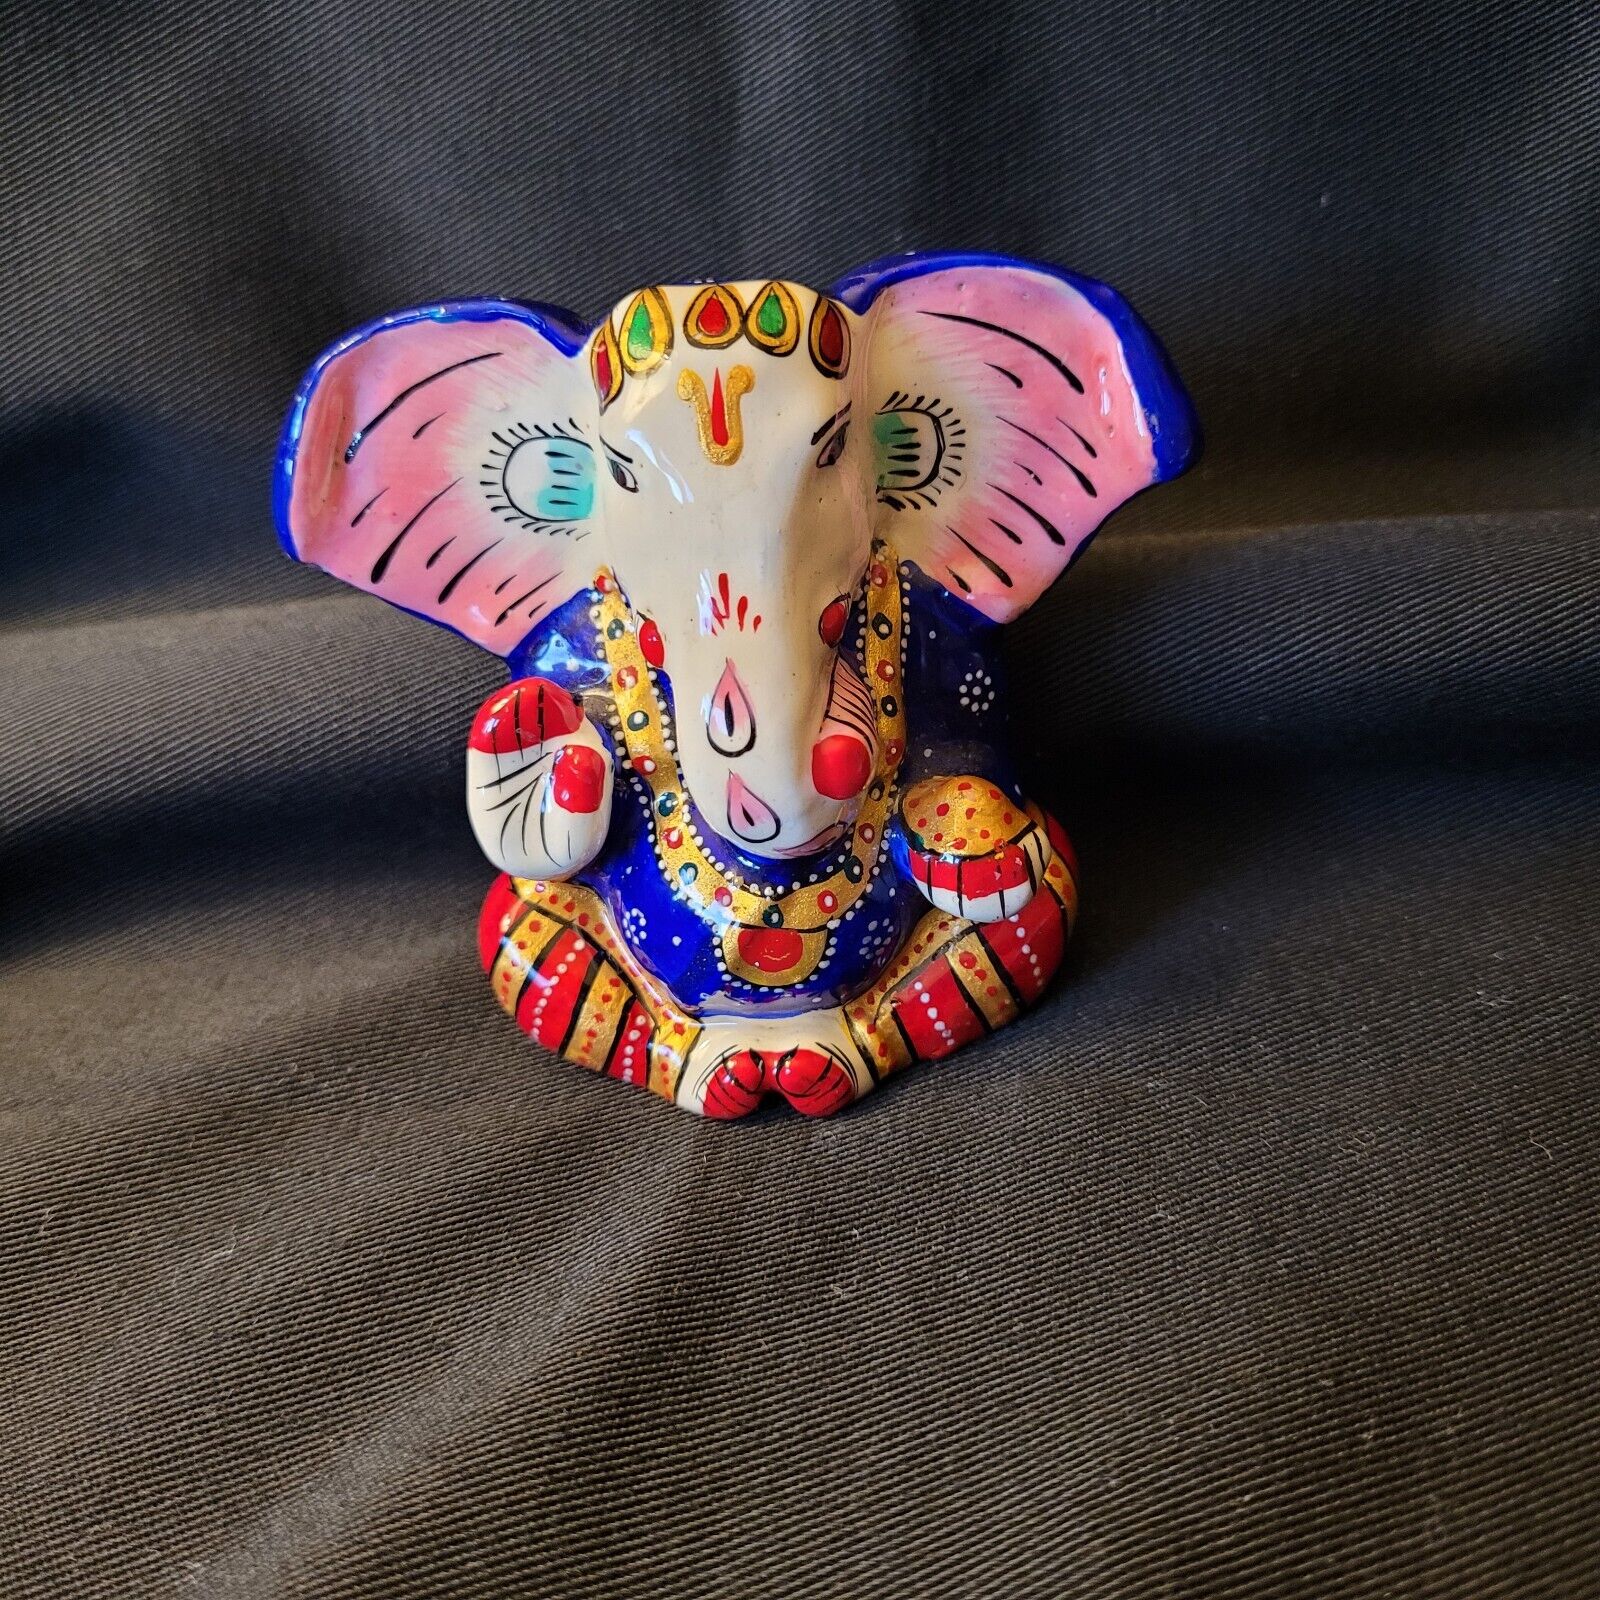 BIG EARED HINDU GANESH PAINTED STATUE 2.5 INCHES